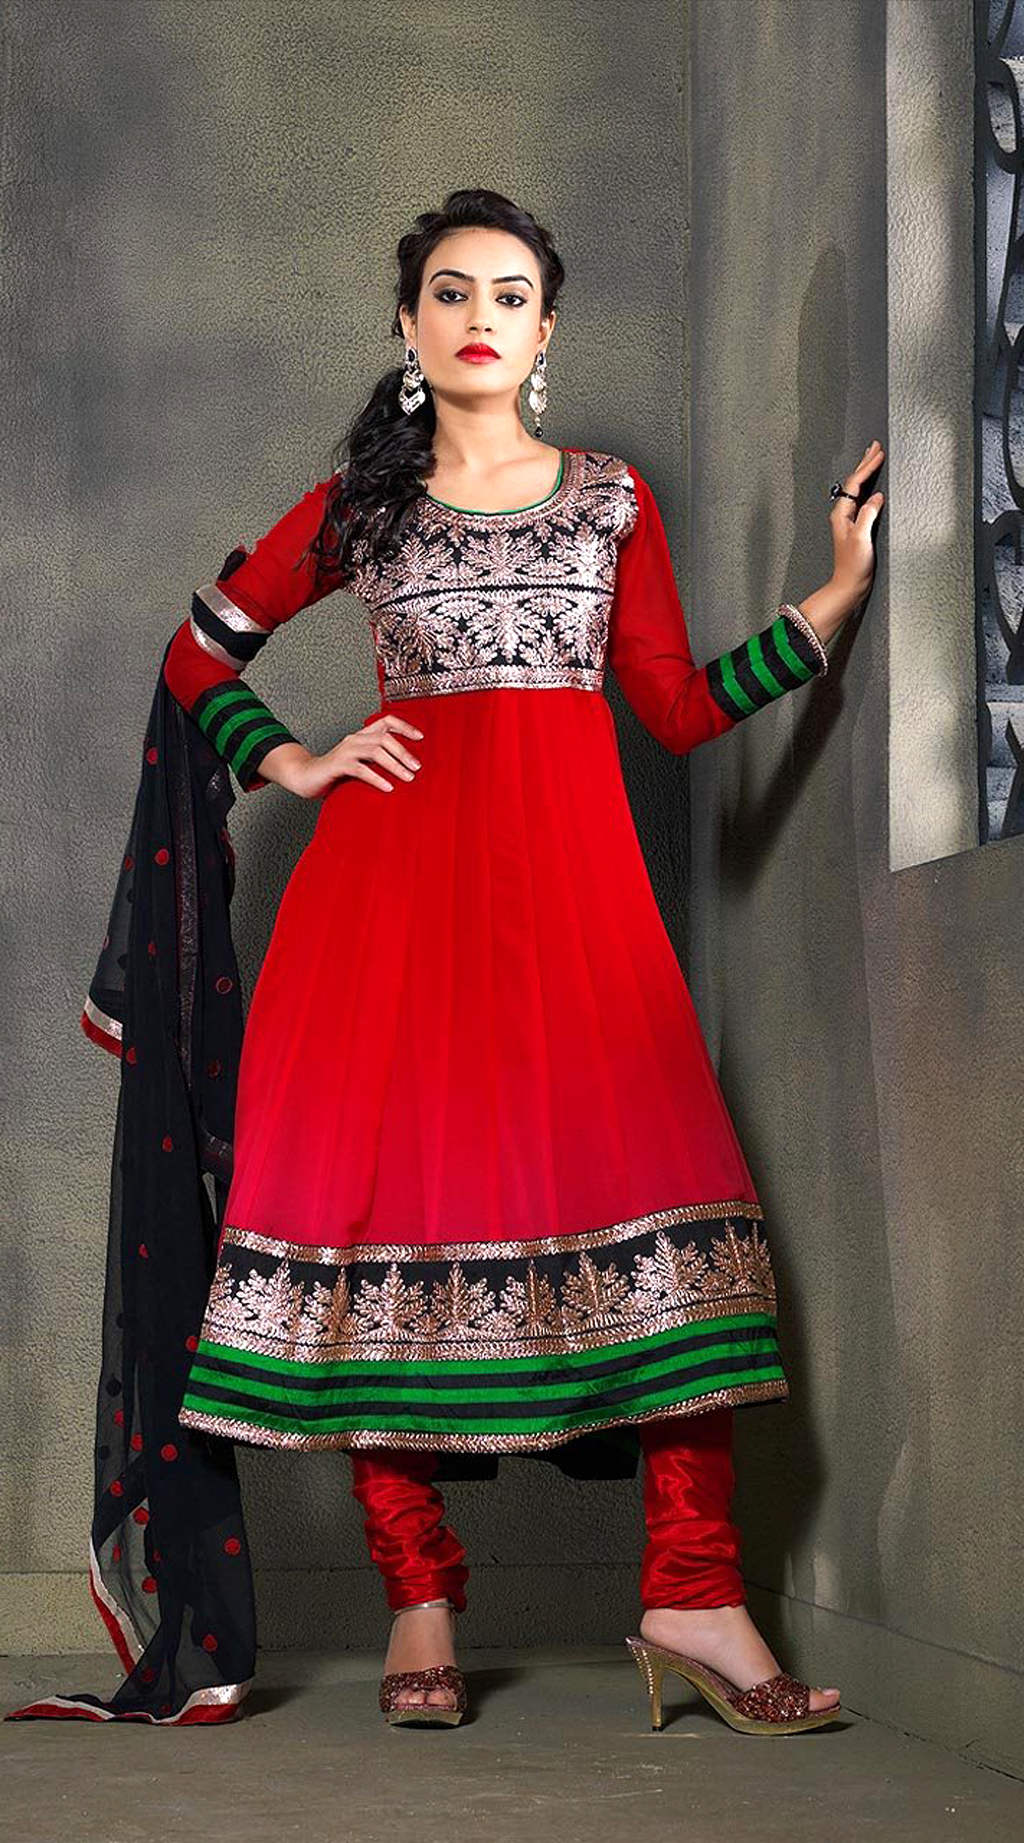 Surbhi Looking Lovely In Red Dress